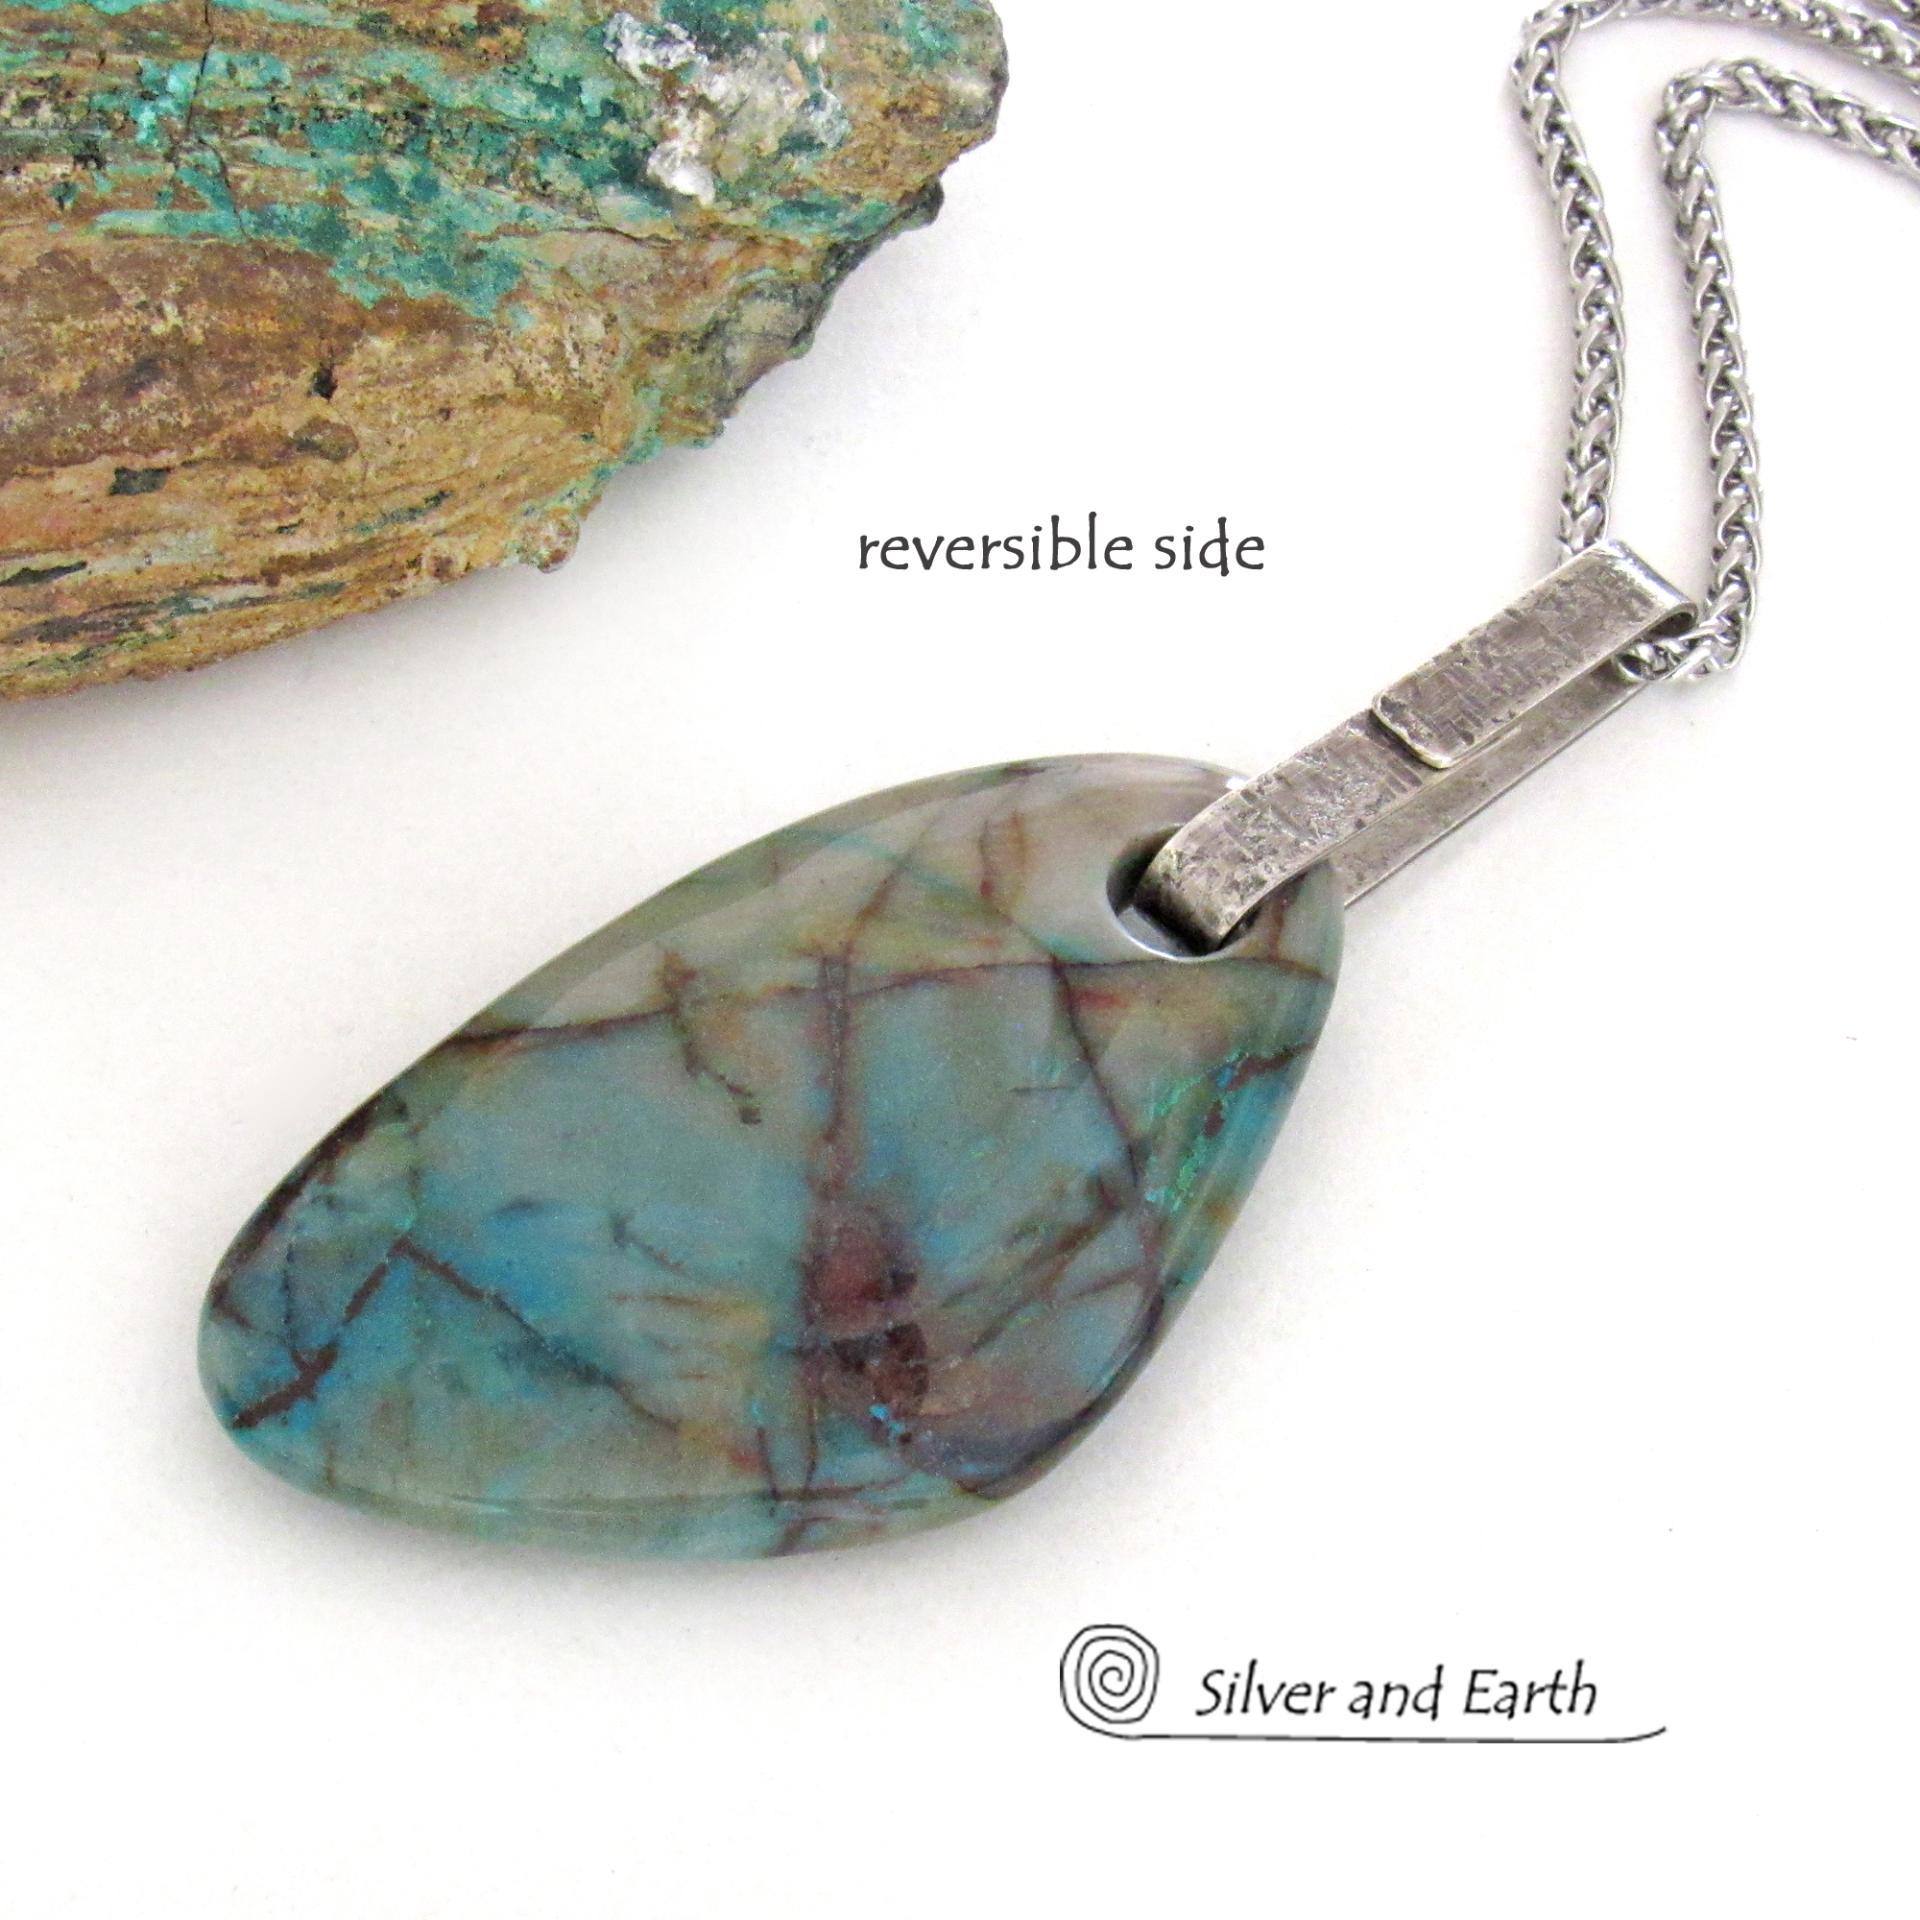 Large Blue Chrysocolla Quartz Gemstone Sterling Silver Necklace - One of a Kind Unique Natural Stone Jewelry 